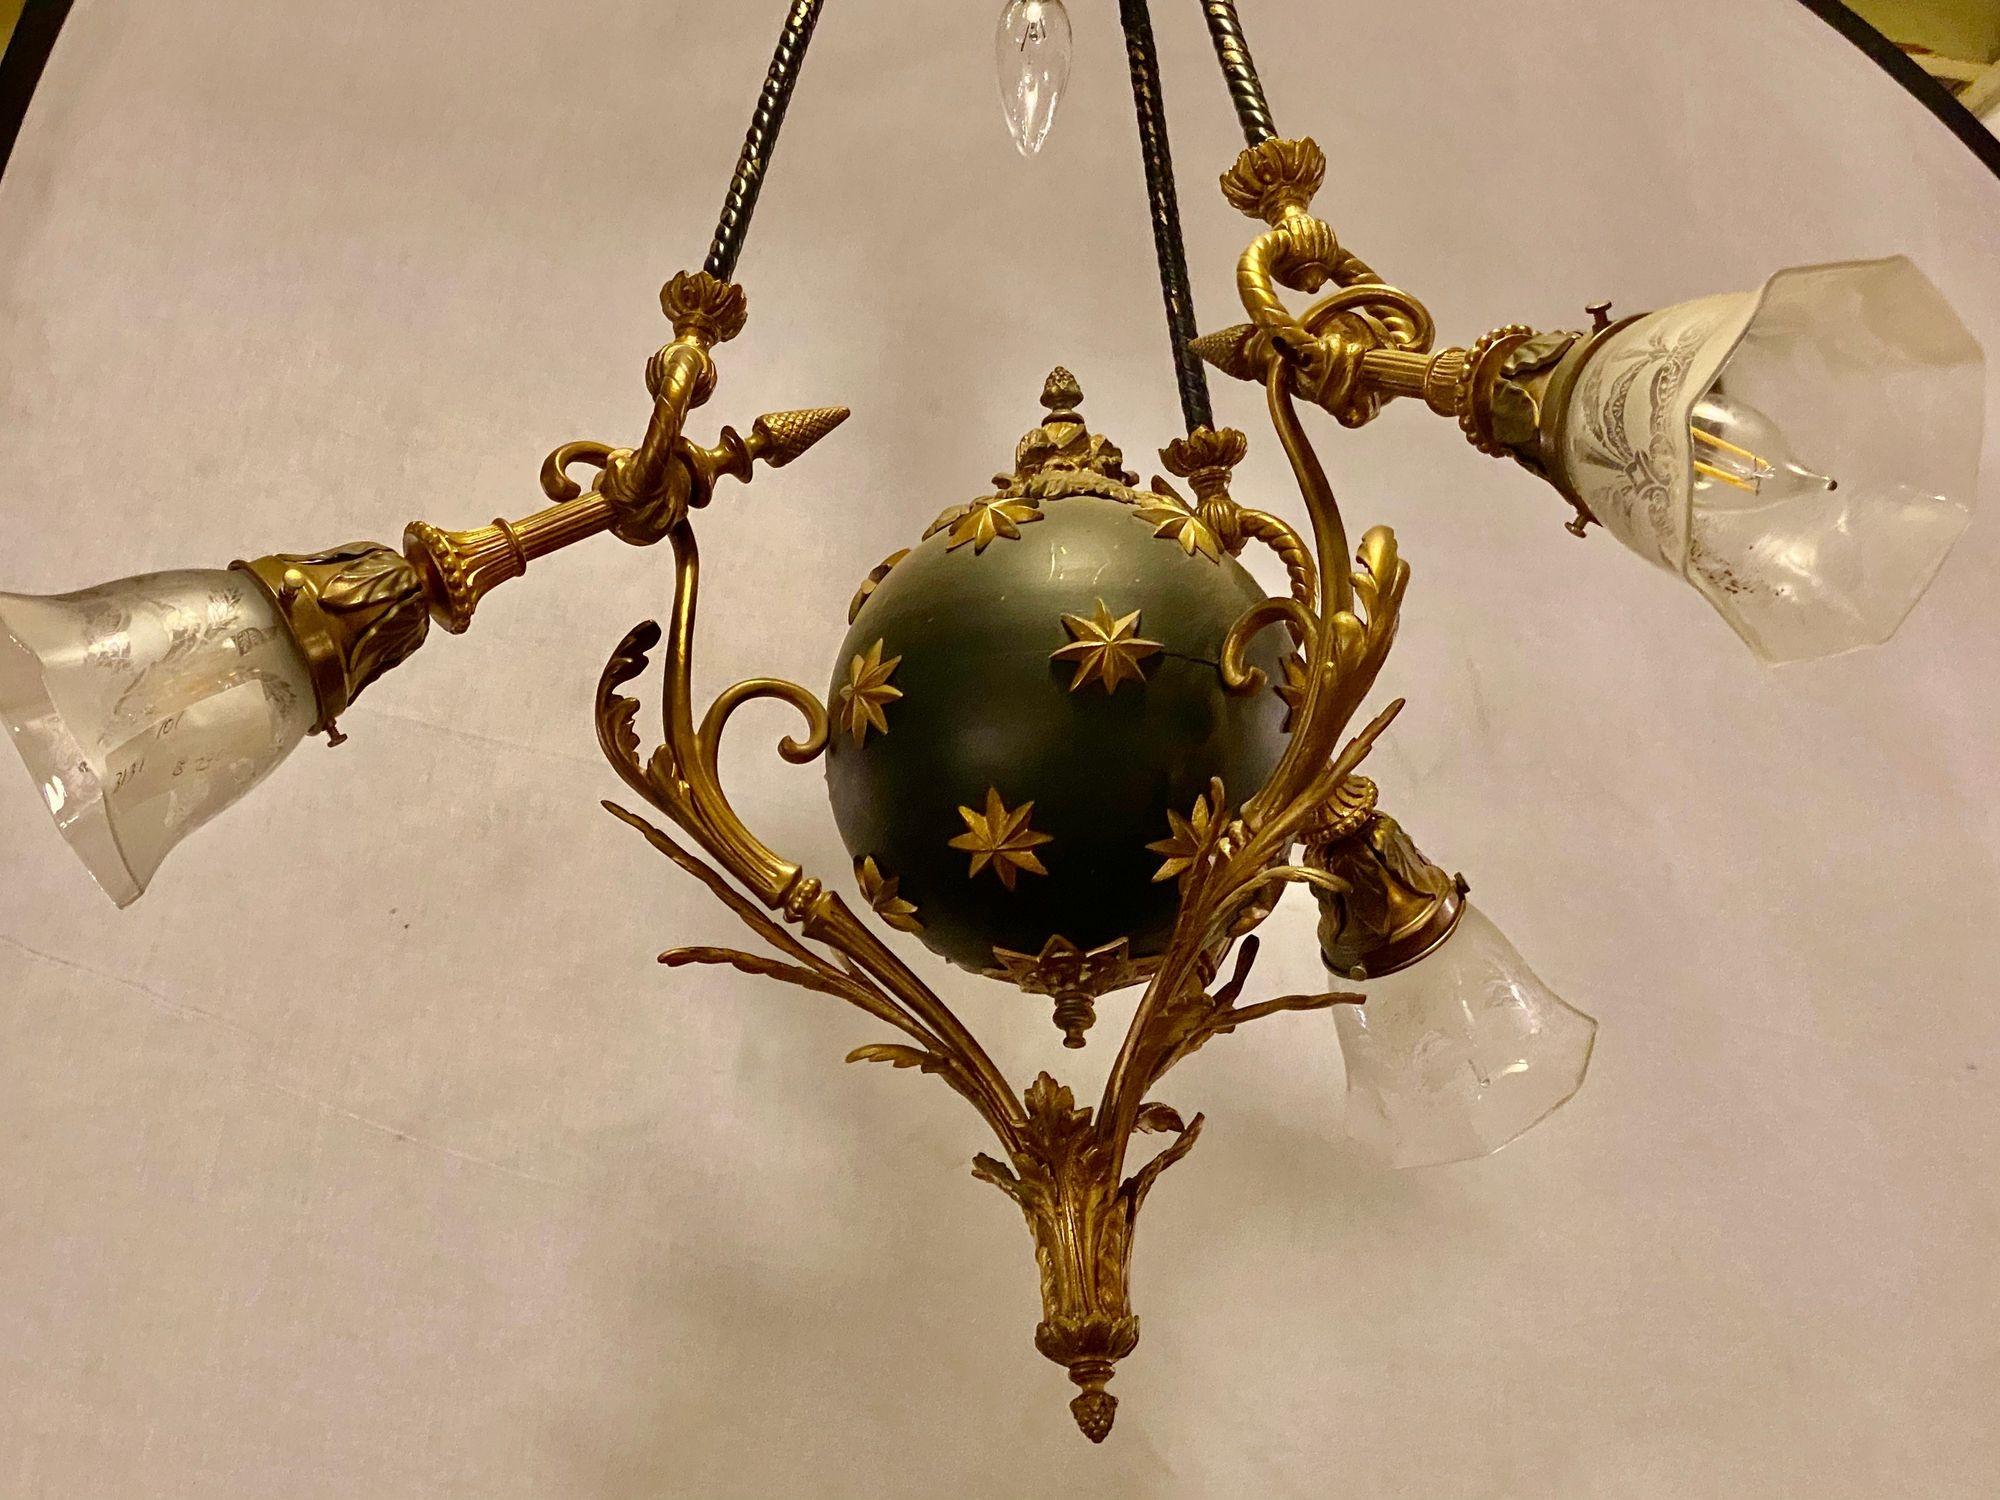 Antique French Empire style chandelier ebonized sphere with bronze surrounds. With four lights. Center etched glass shade missing.

